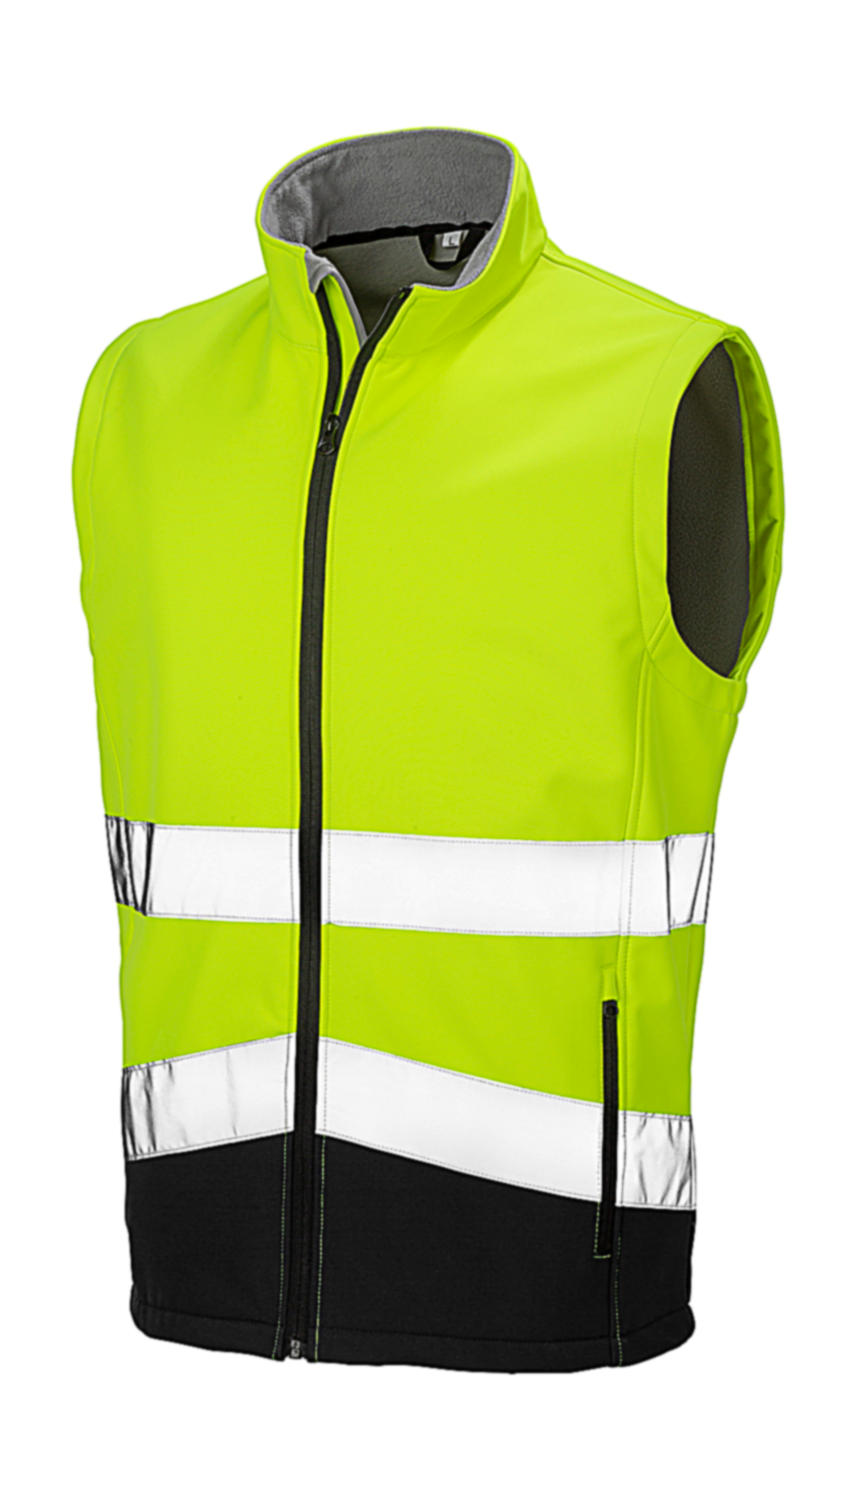  Printable Safety Softshell Gilet in Farbe Fluorescent Yellow/Black